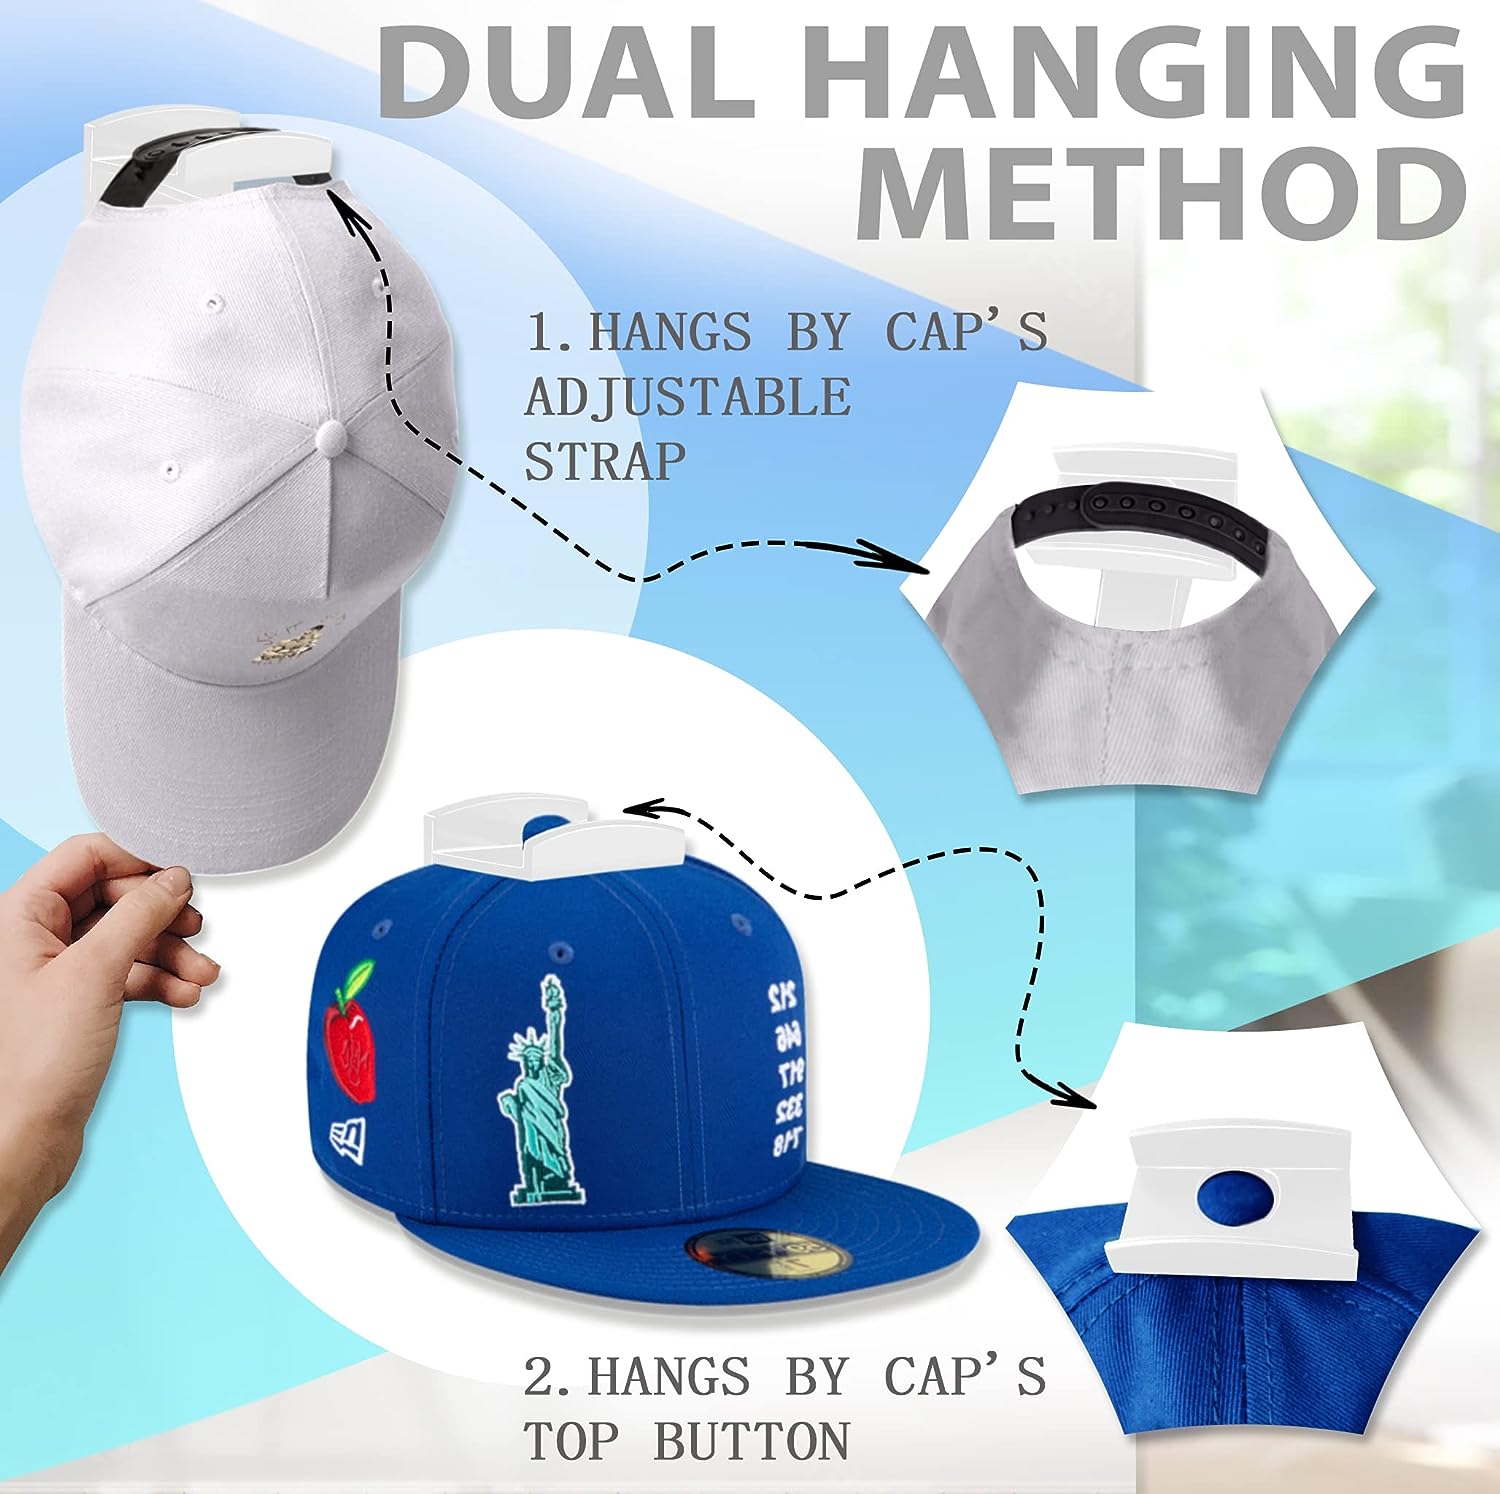 Hat Wall Rack - Adhesive Hat Hooks for Baseball Caps - No Drilling